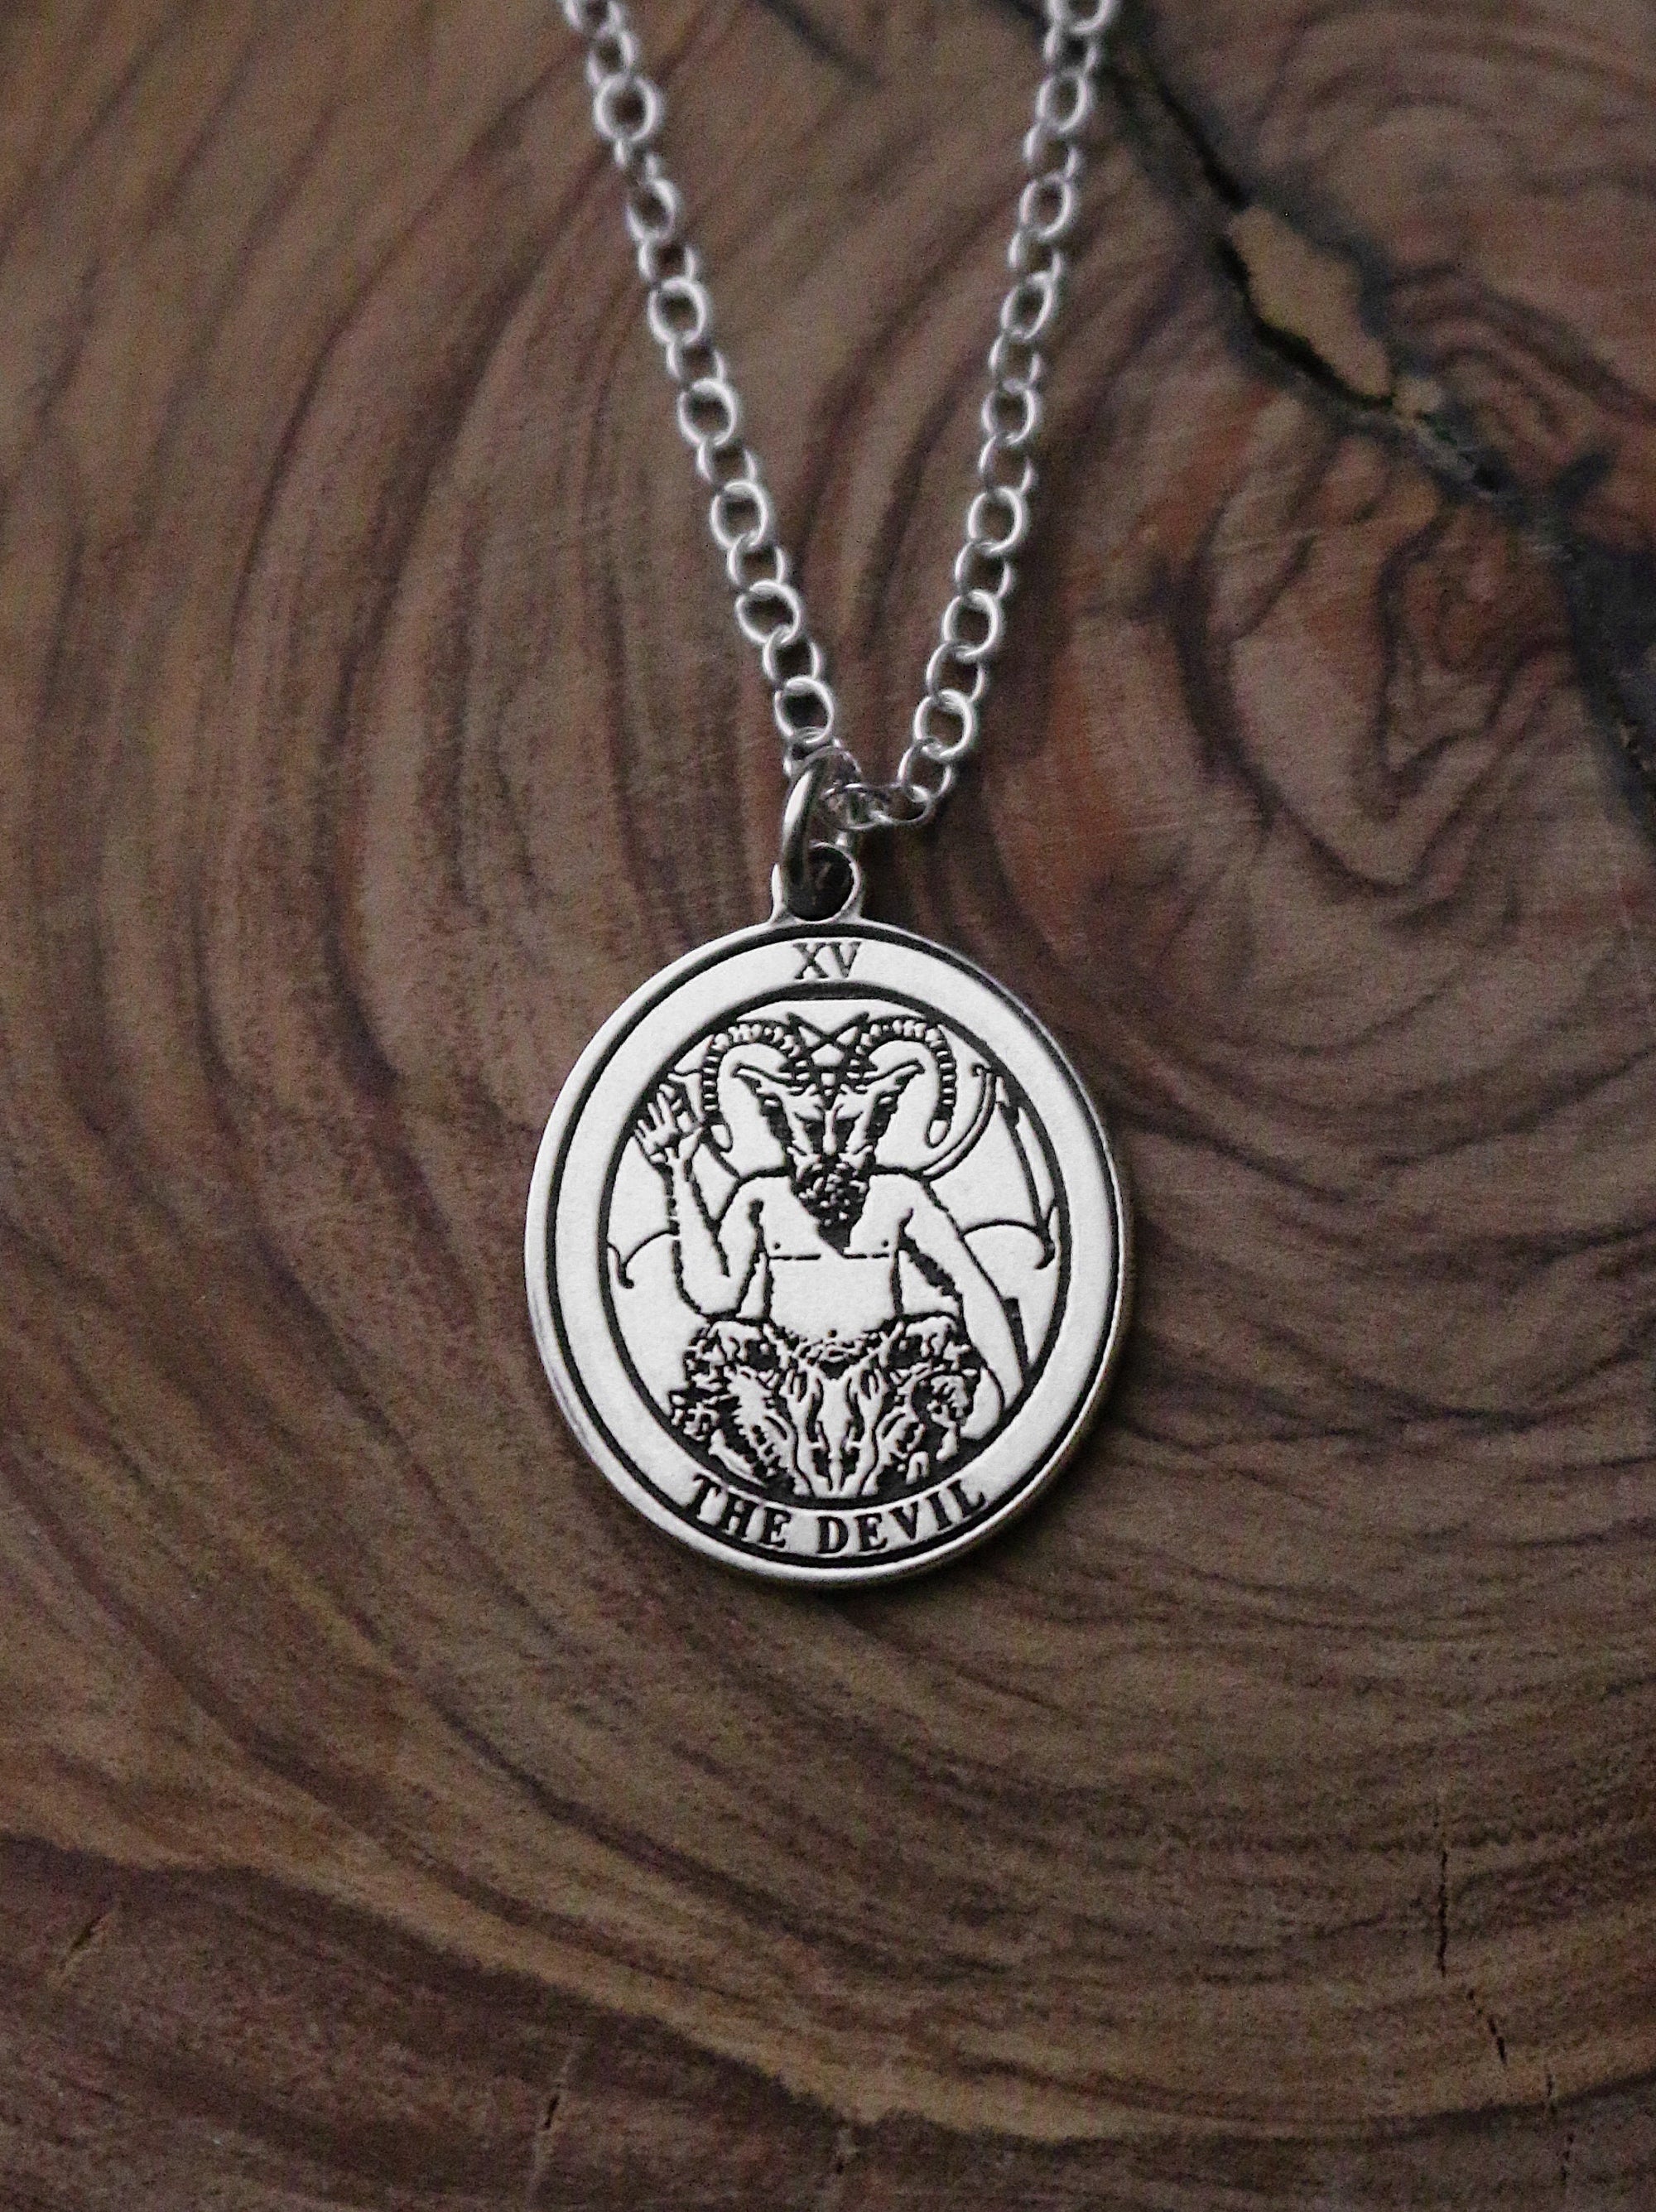 Round The Devil Tarot Card Necklace | Best Friend Birthday Gift | Tarot Card Necklace | Celestial Mystical Amulet | Dainty Witch Necklace